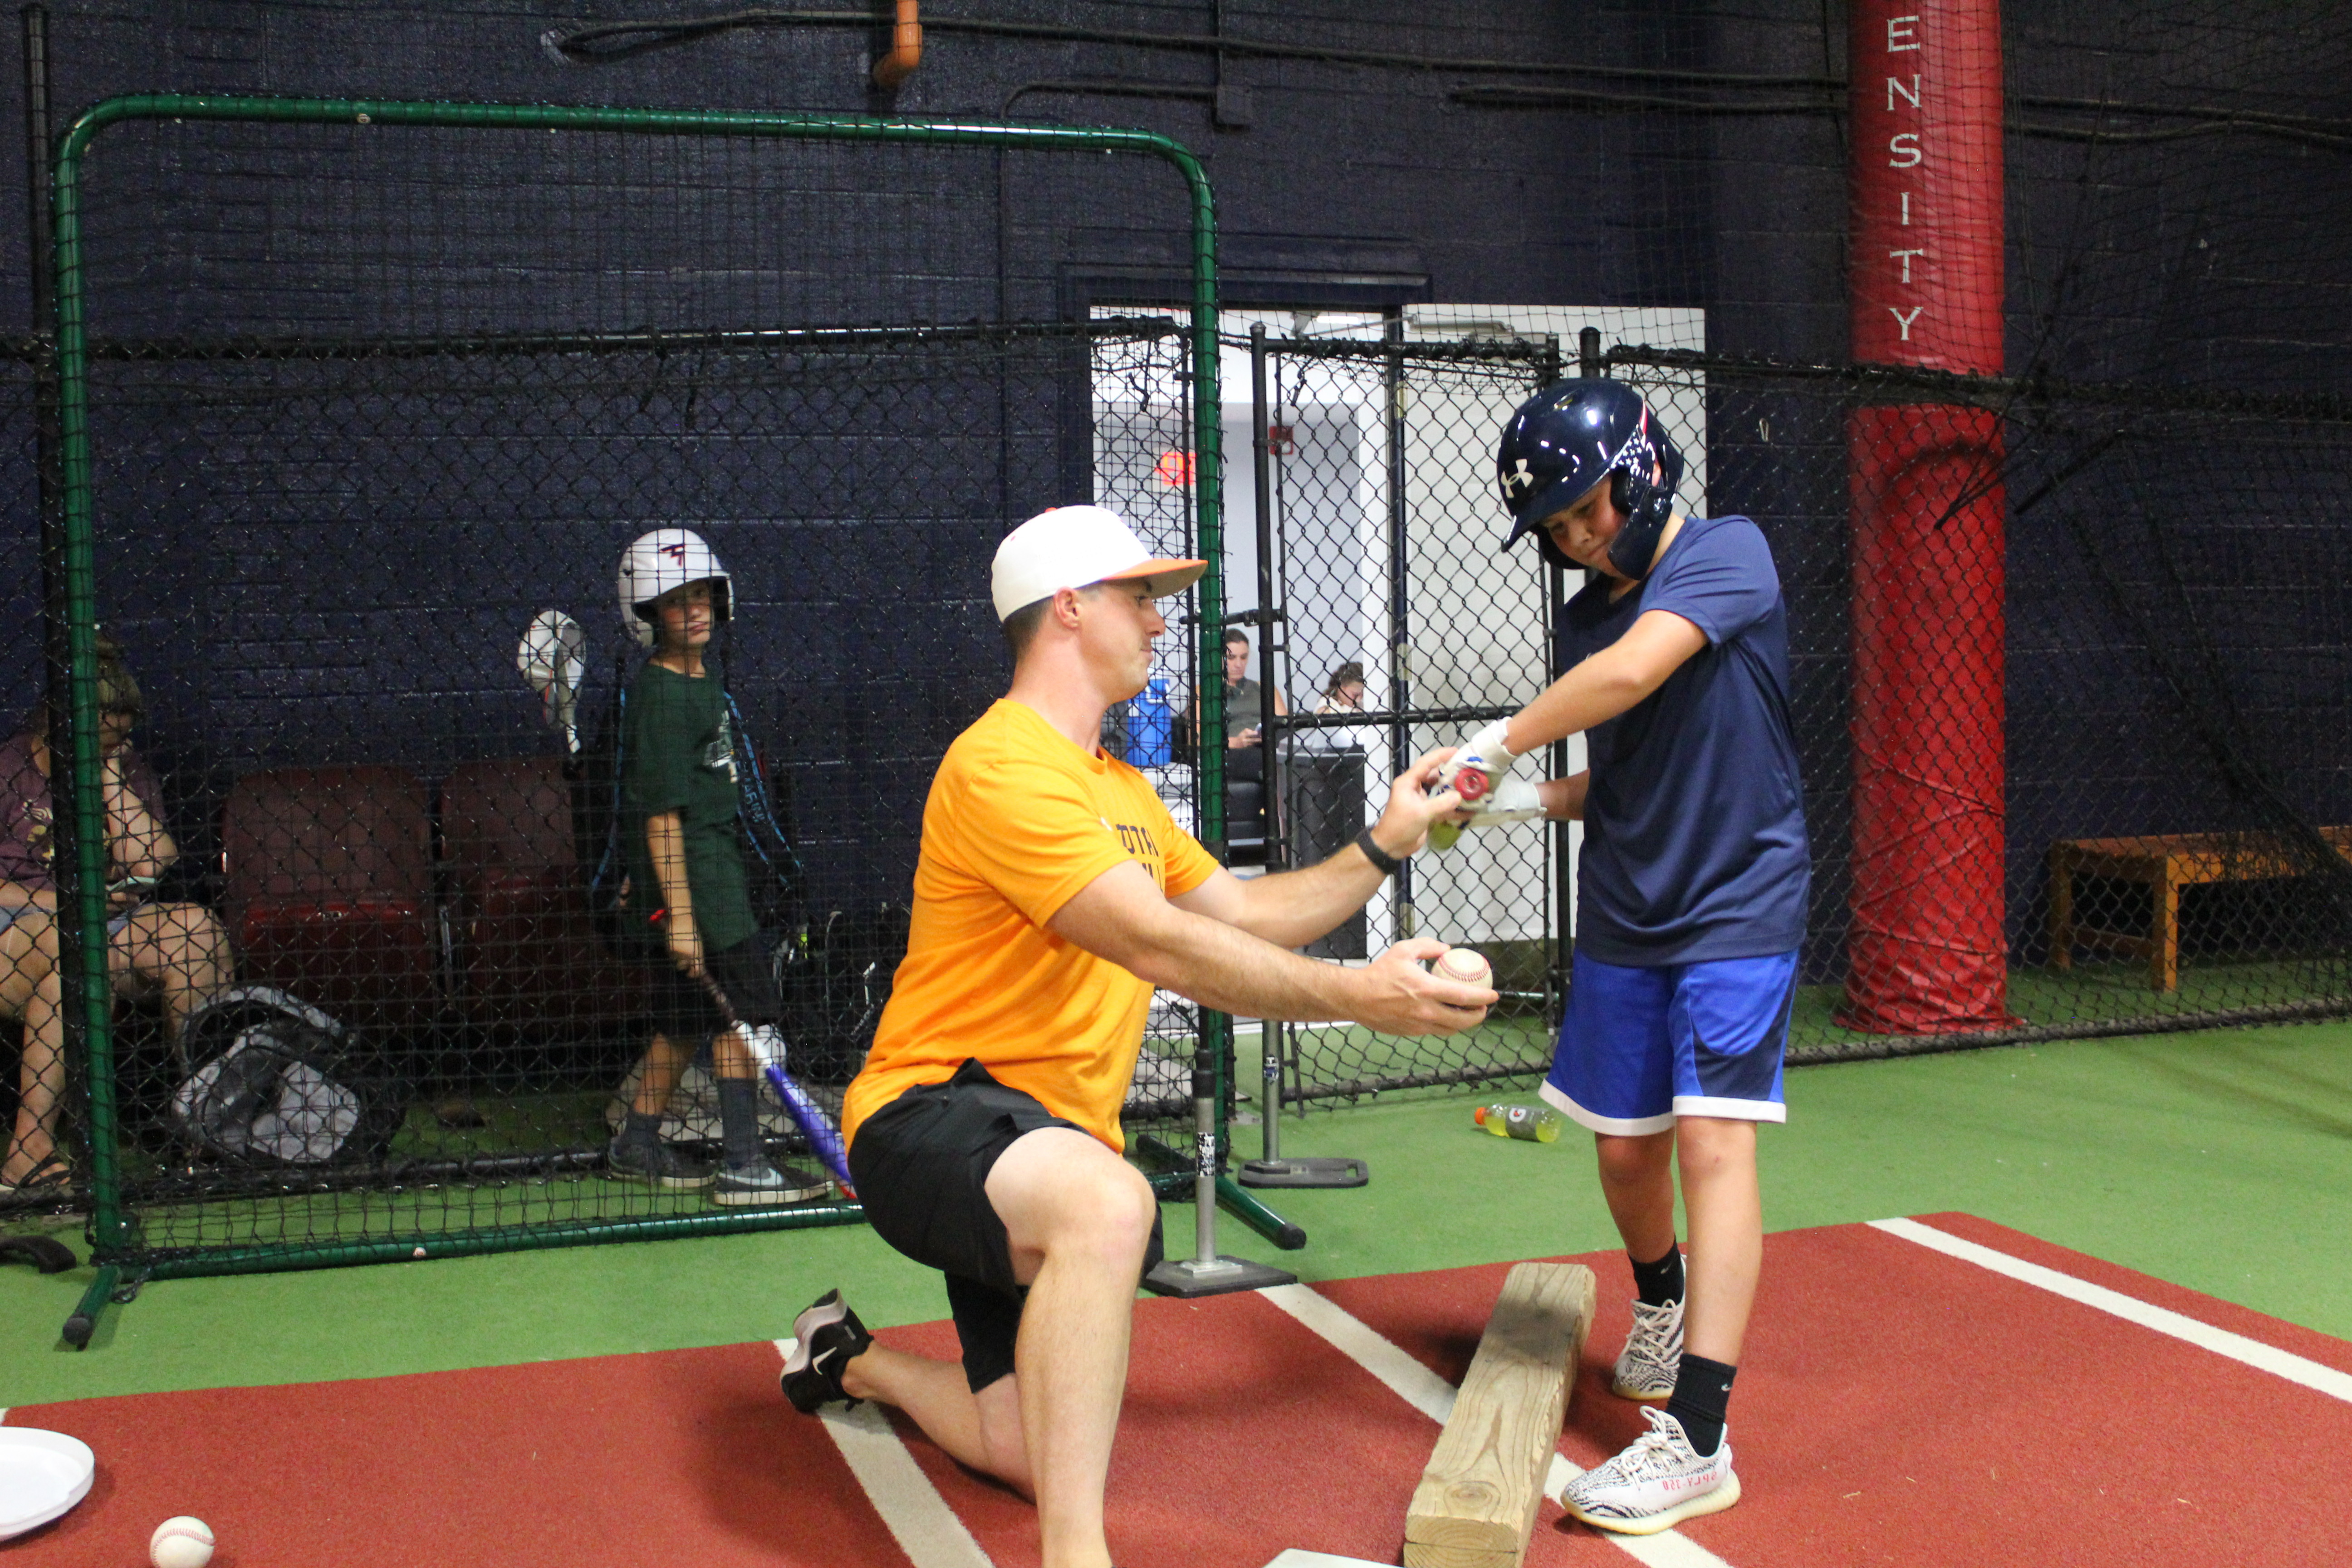 A youth sports coach demonstrates how to hit a ball